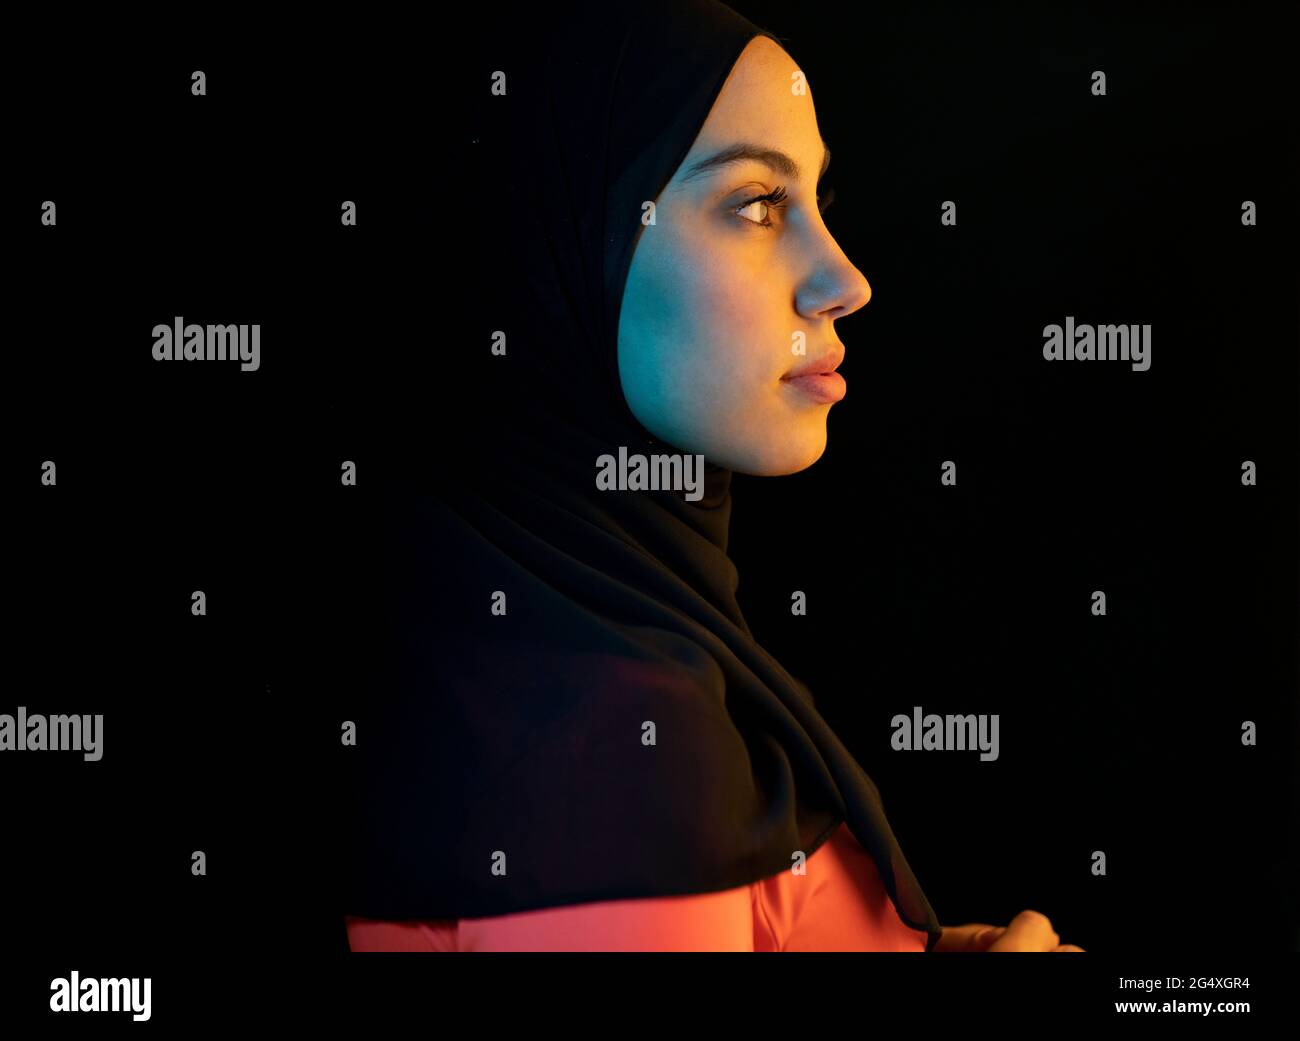 Young Arab woman with headscarf against black background Stock Photo